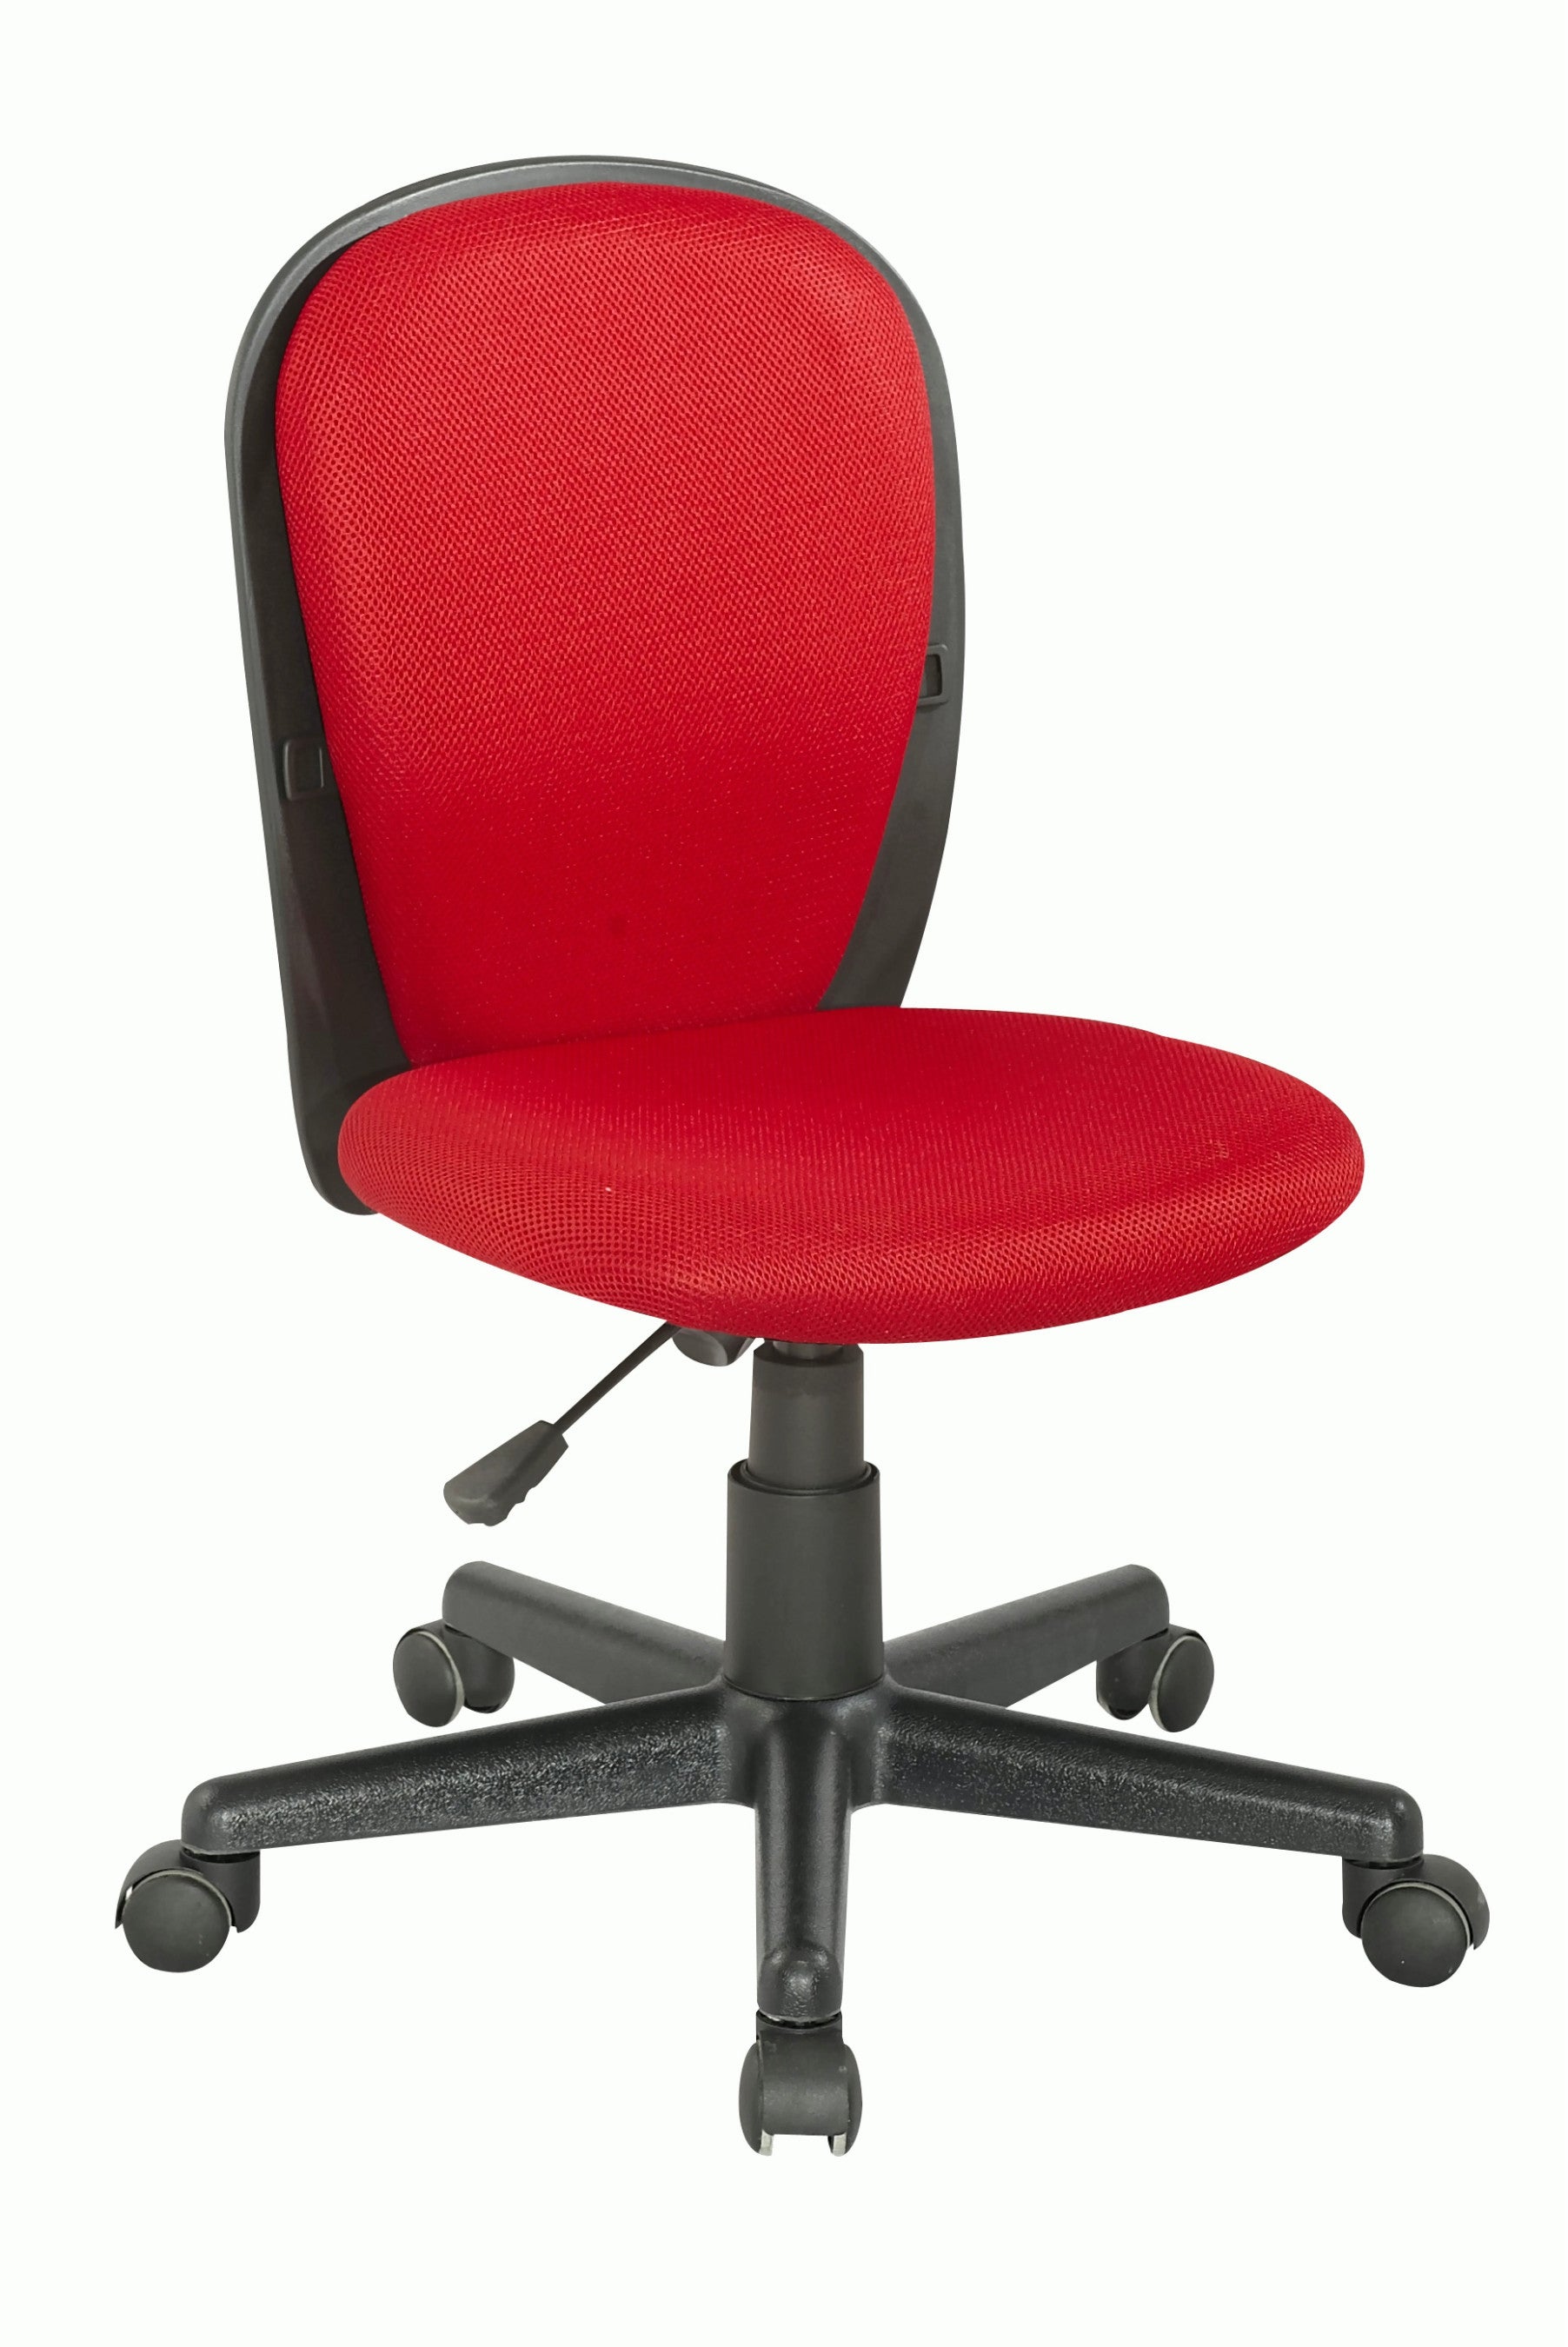 Chintaly 4245-cch-red Fabric Back And Seat Youth Desk Chair